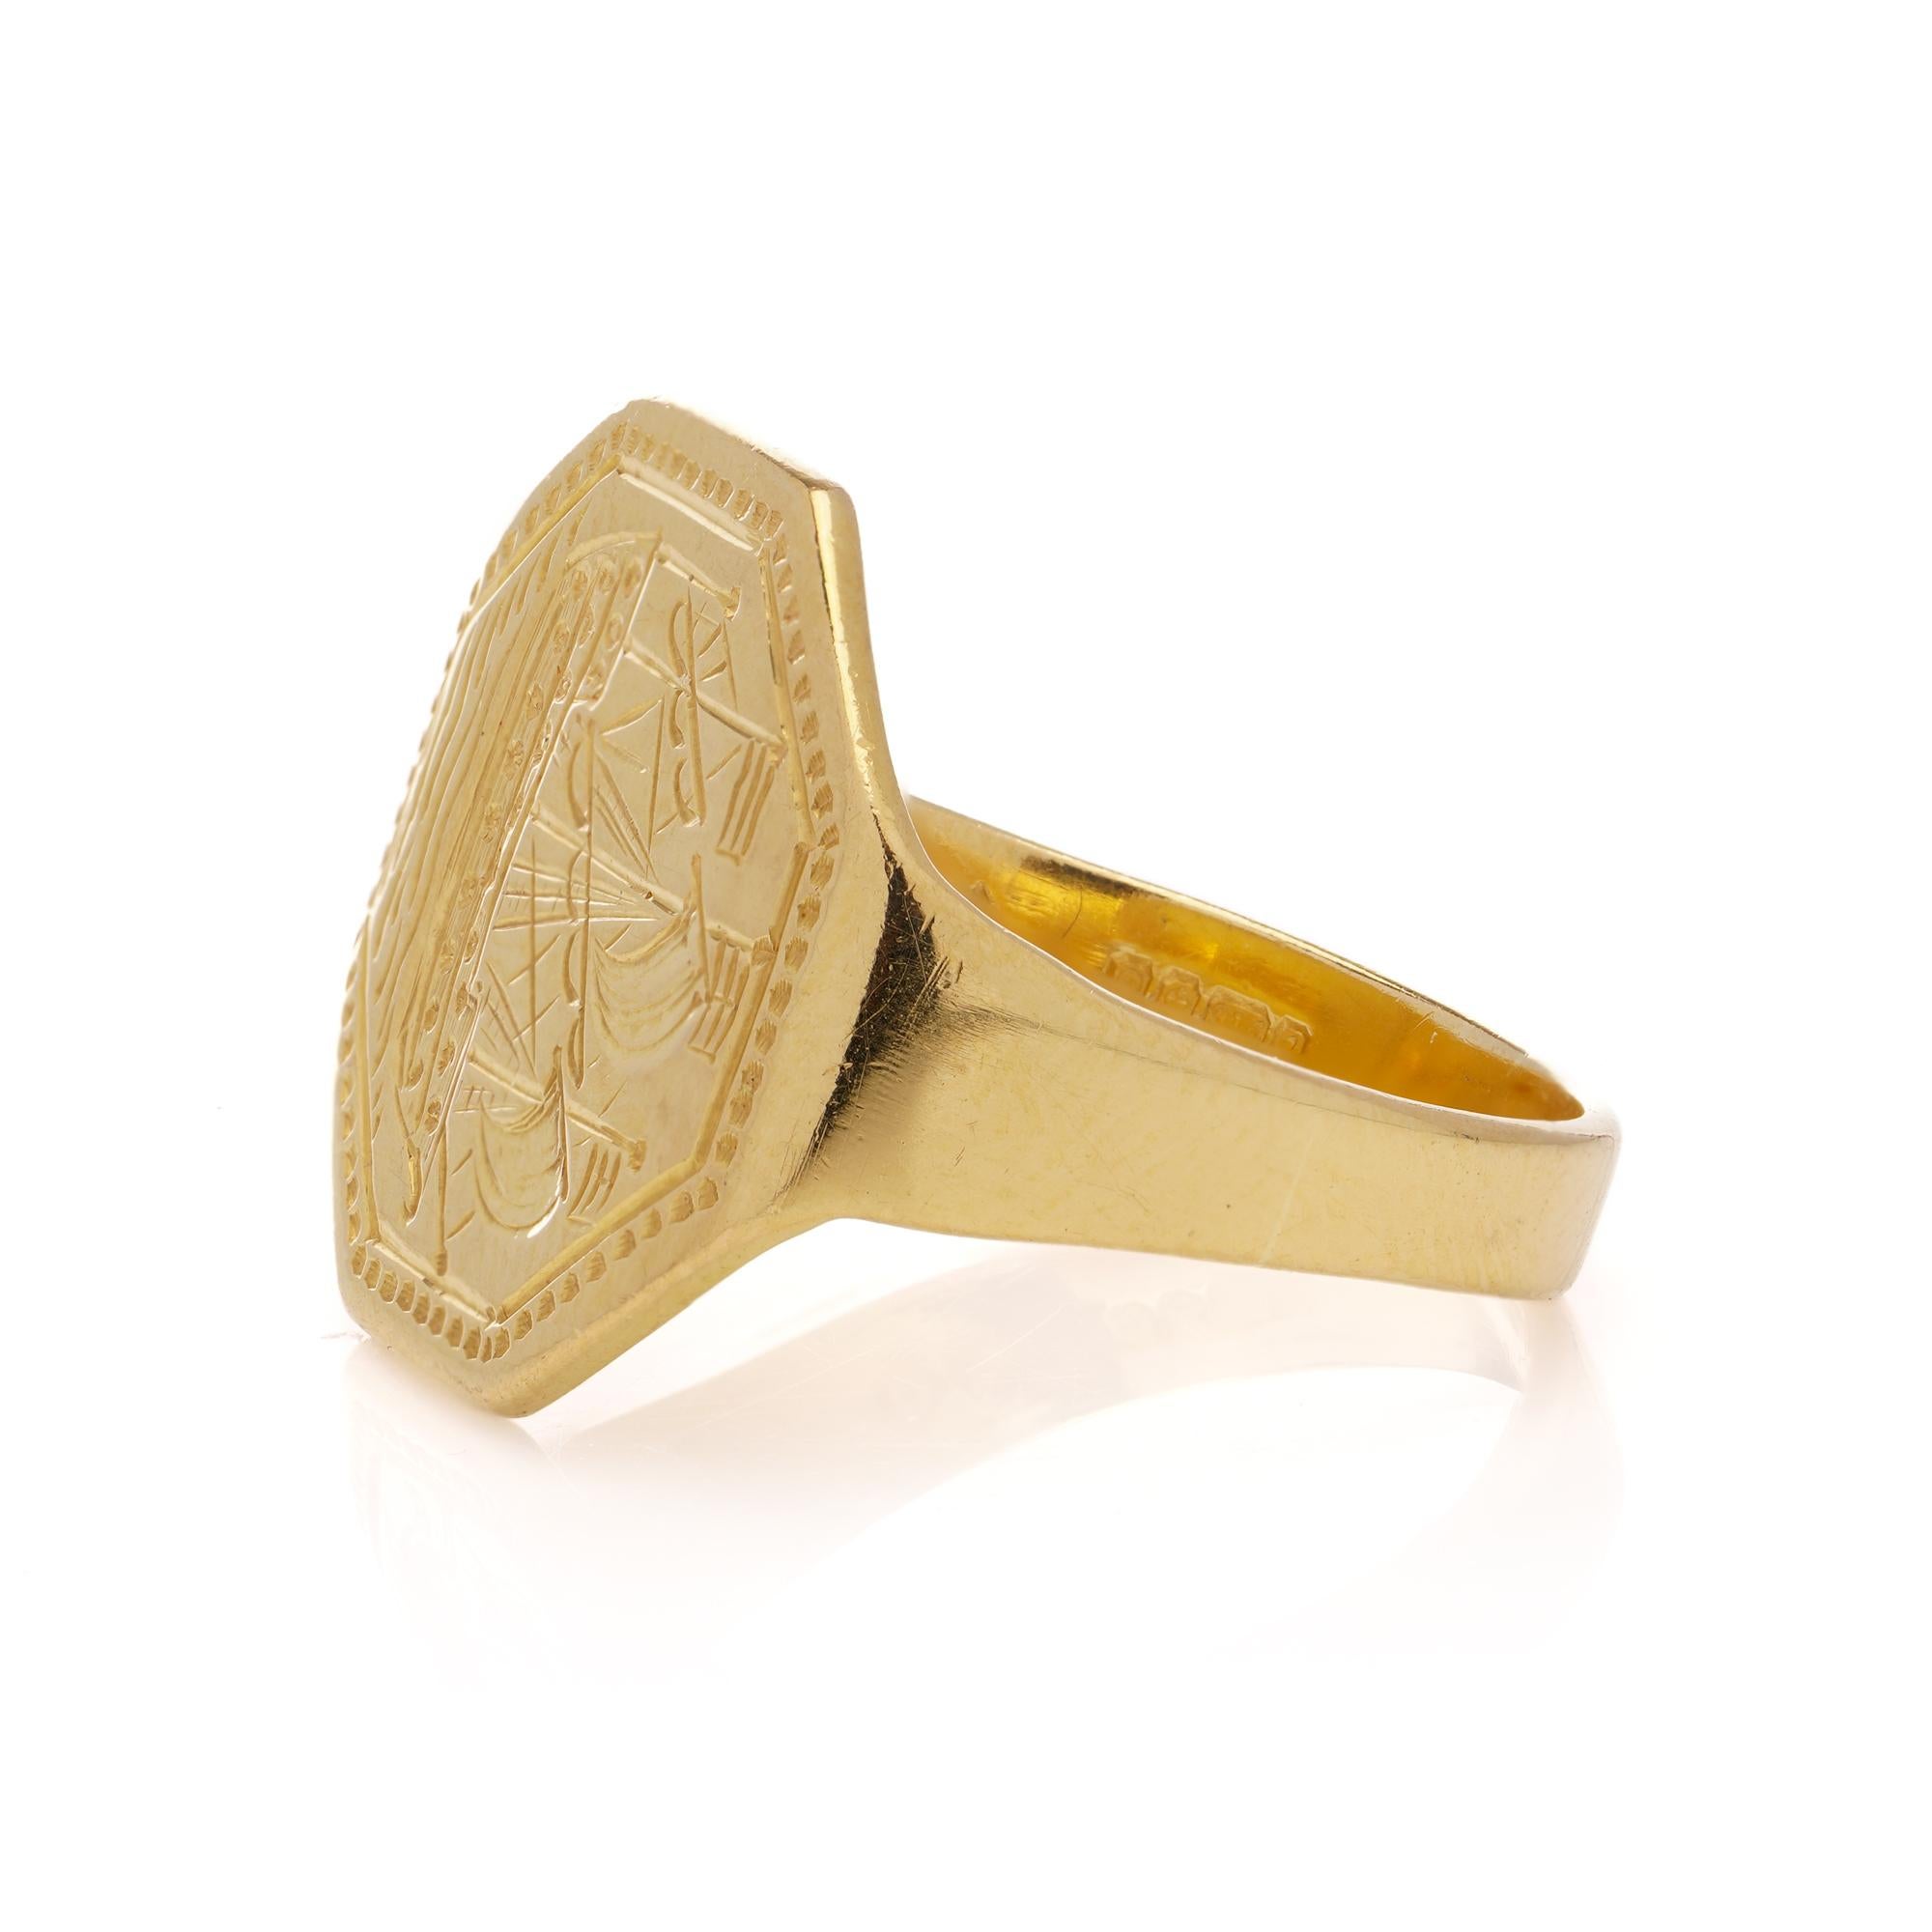 Vintage 22kt. yellow gold signet ring featuring the man-of-war ship For Sale 4